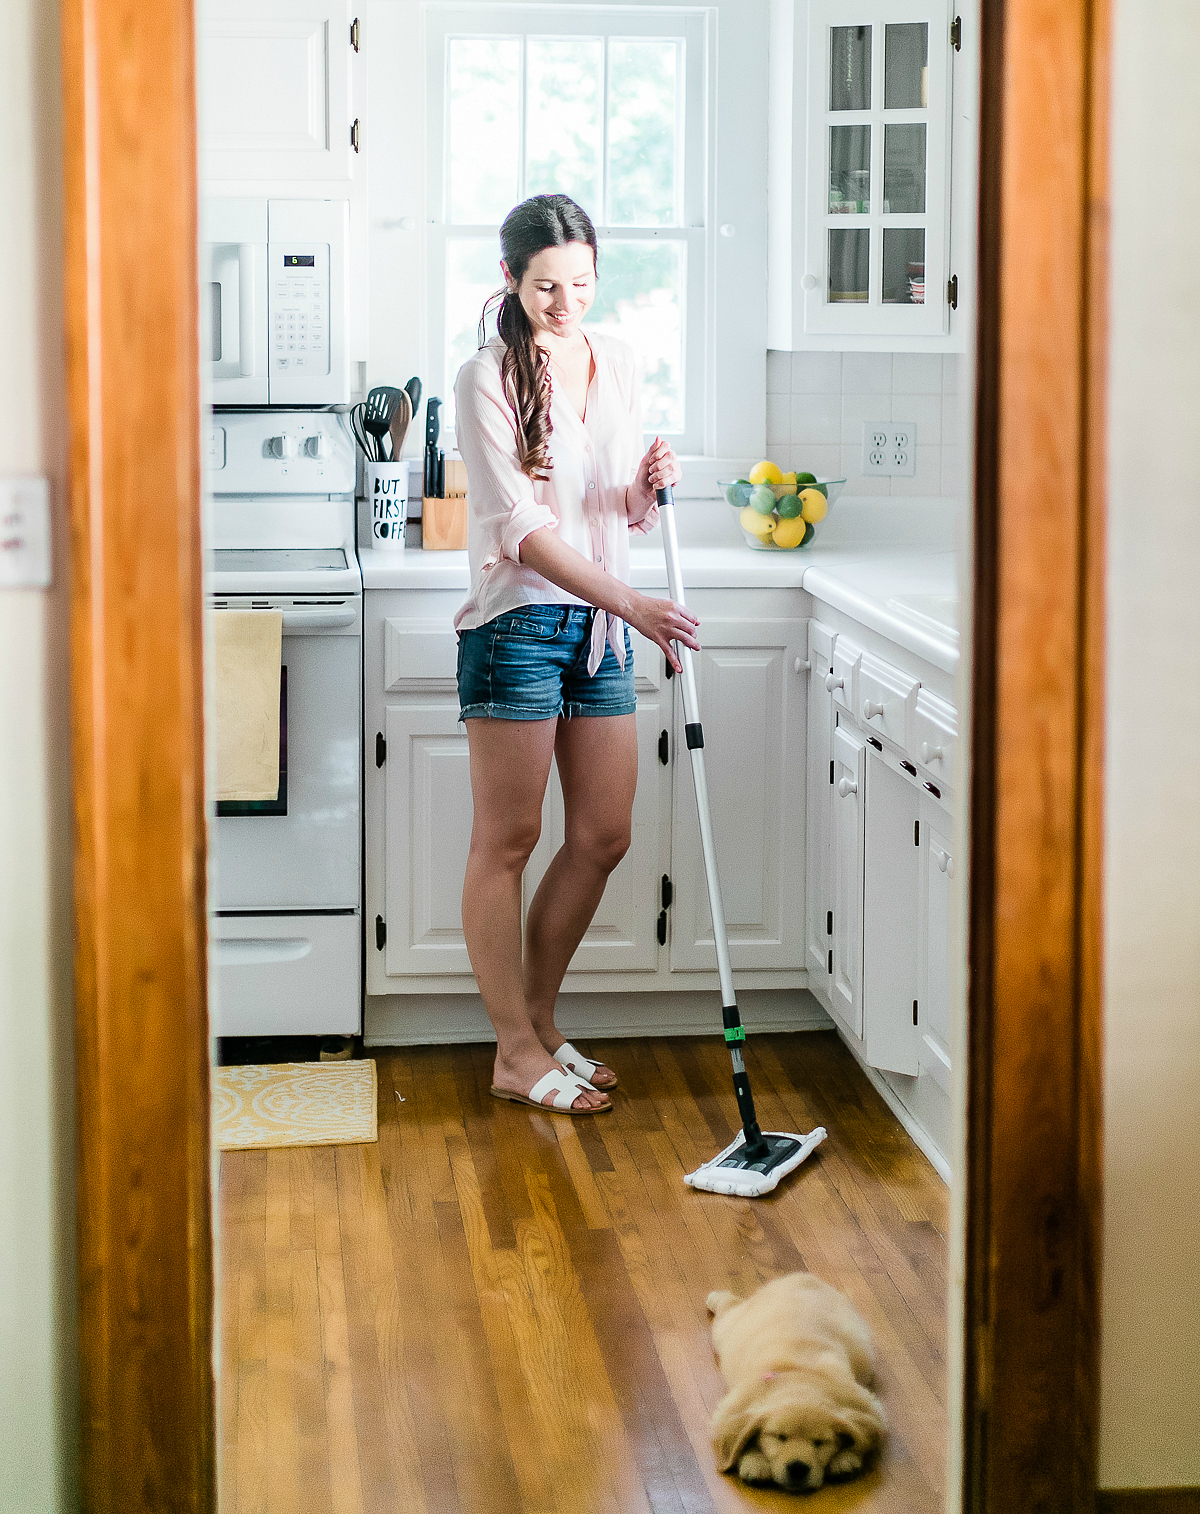 best way to clean hardwood floors with pets, best mop for dog hair on hardwood, STAINMASTER Sweep and Mop Kit review, Cleaning Hacks for Dog Moms: How to Tidy Your Home in 15 Minutes (or Less) by southern lifestyle blogger Stephanie Ziajka from Diary of a Debutante